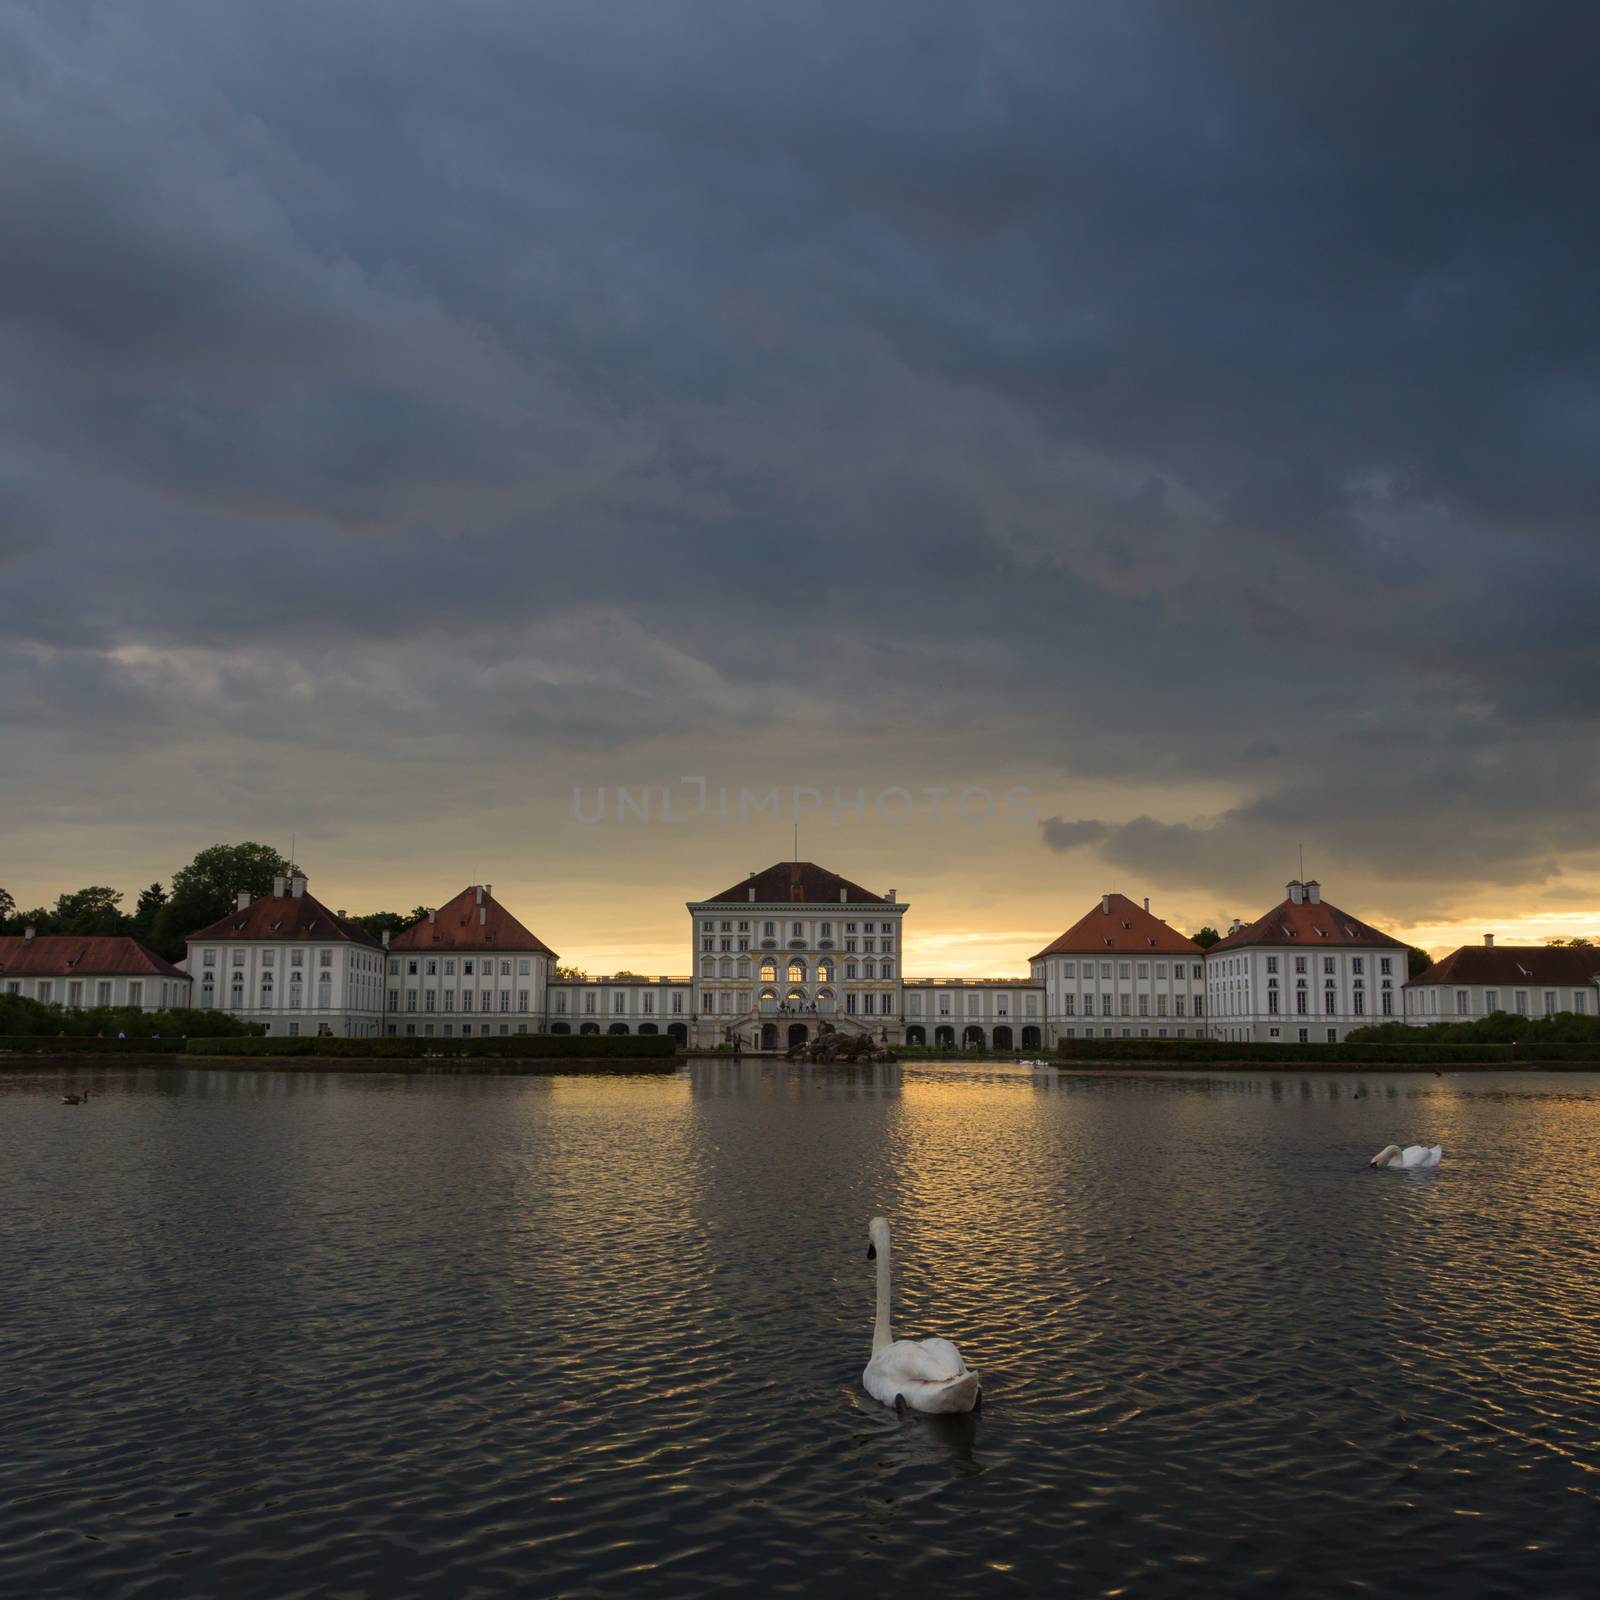 Dramatic scenery of Nymphenburg palace in Munich Germany. Sunset after the sorm. White swans and duks swimming in pond in front of the palace.